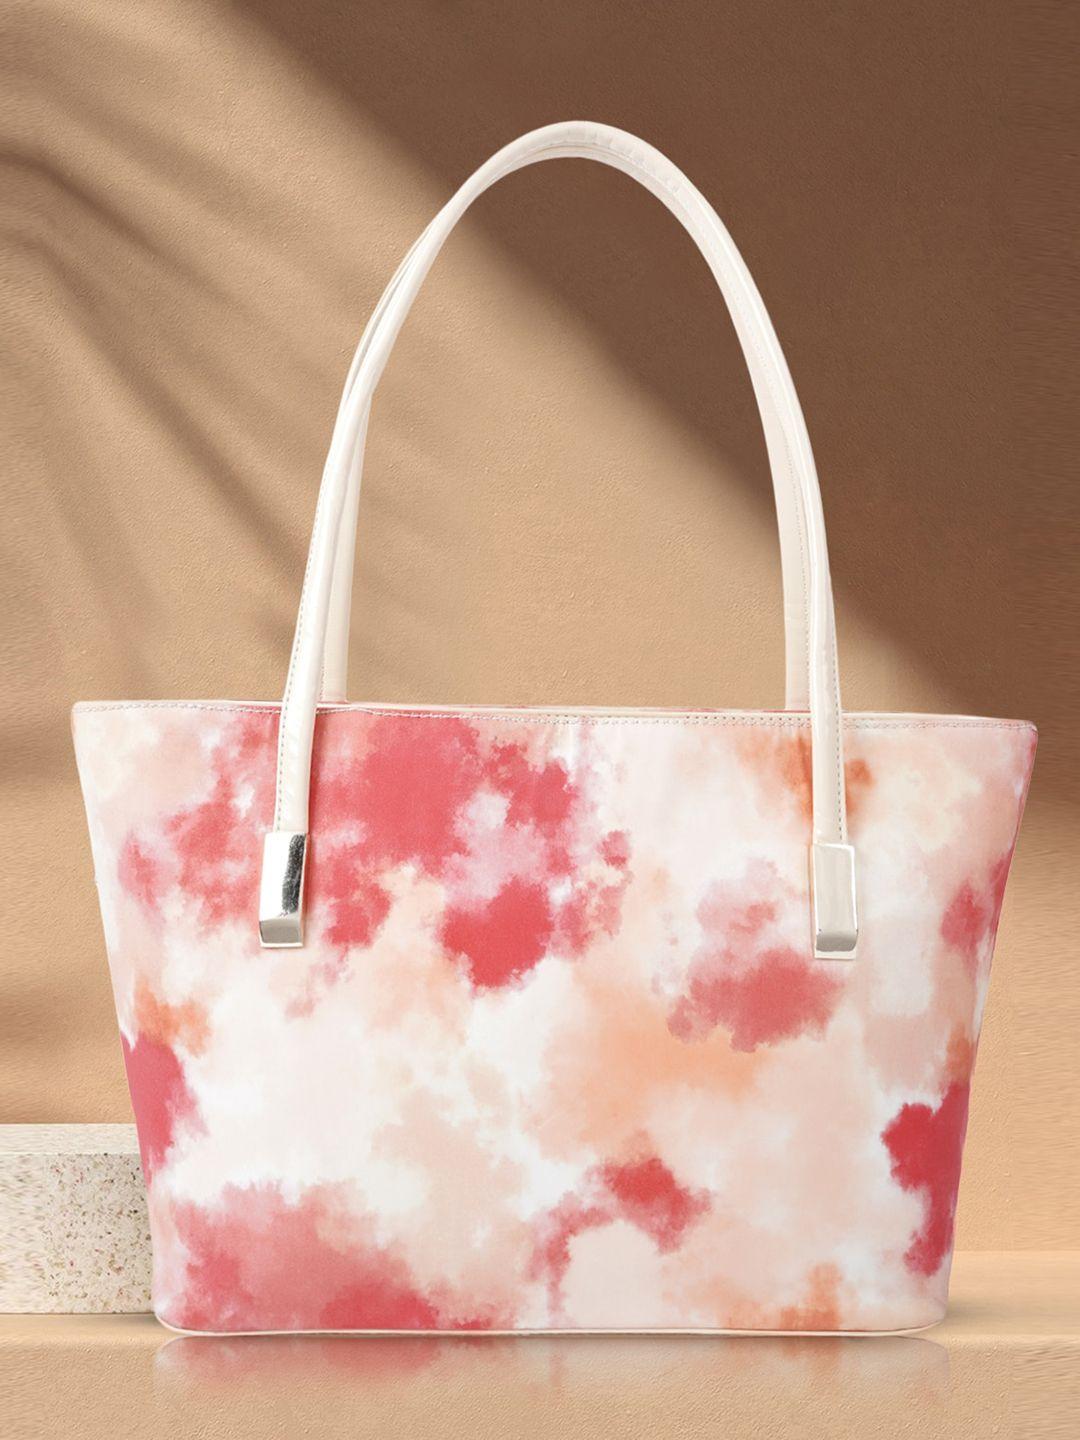 dressberry white structured tote bag with bow detail